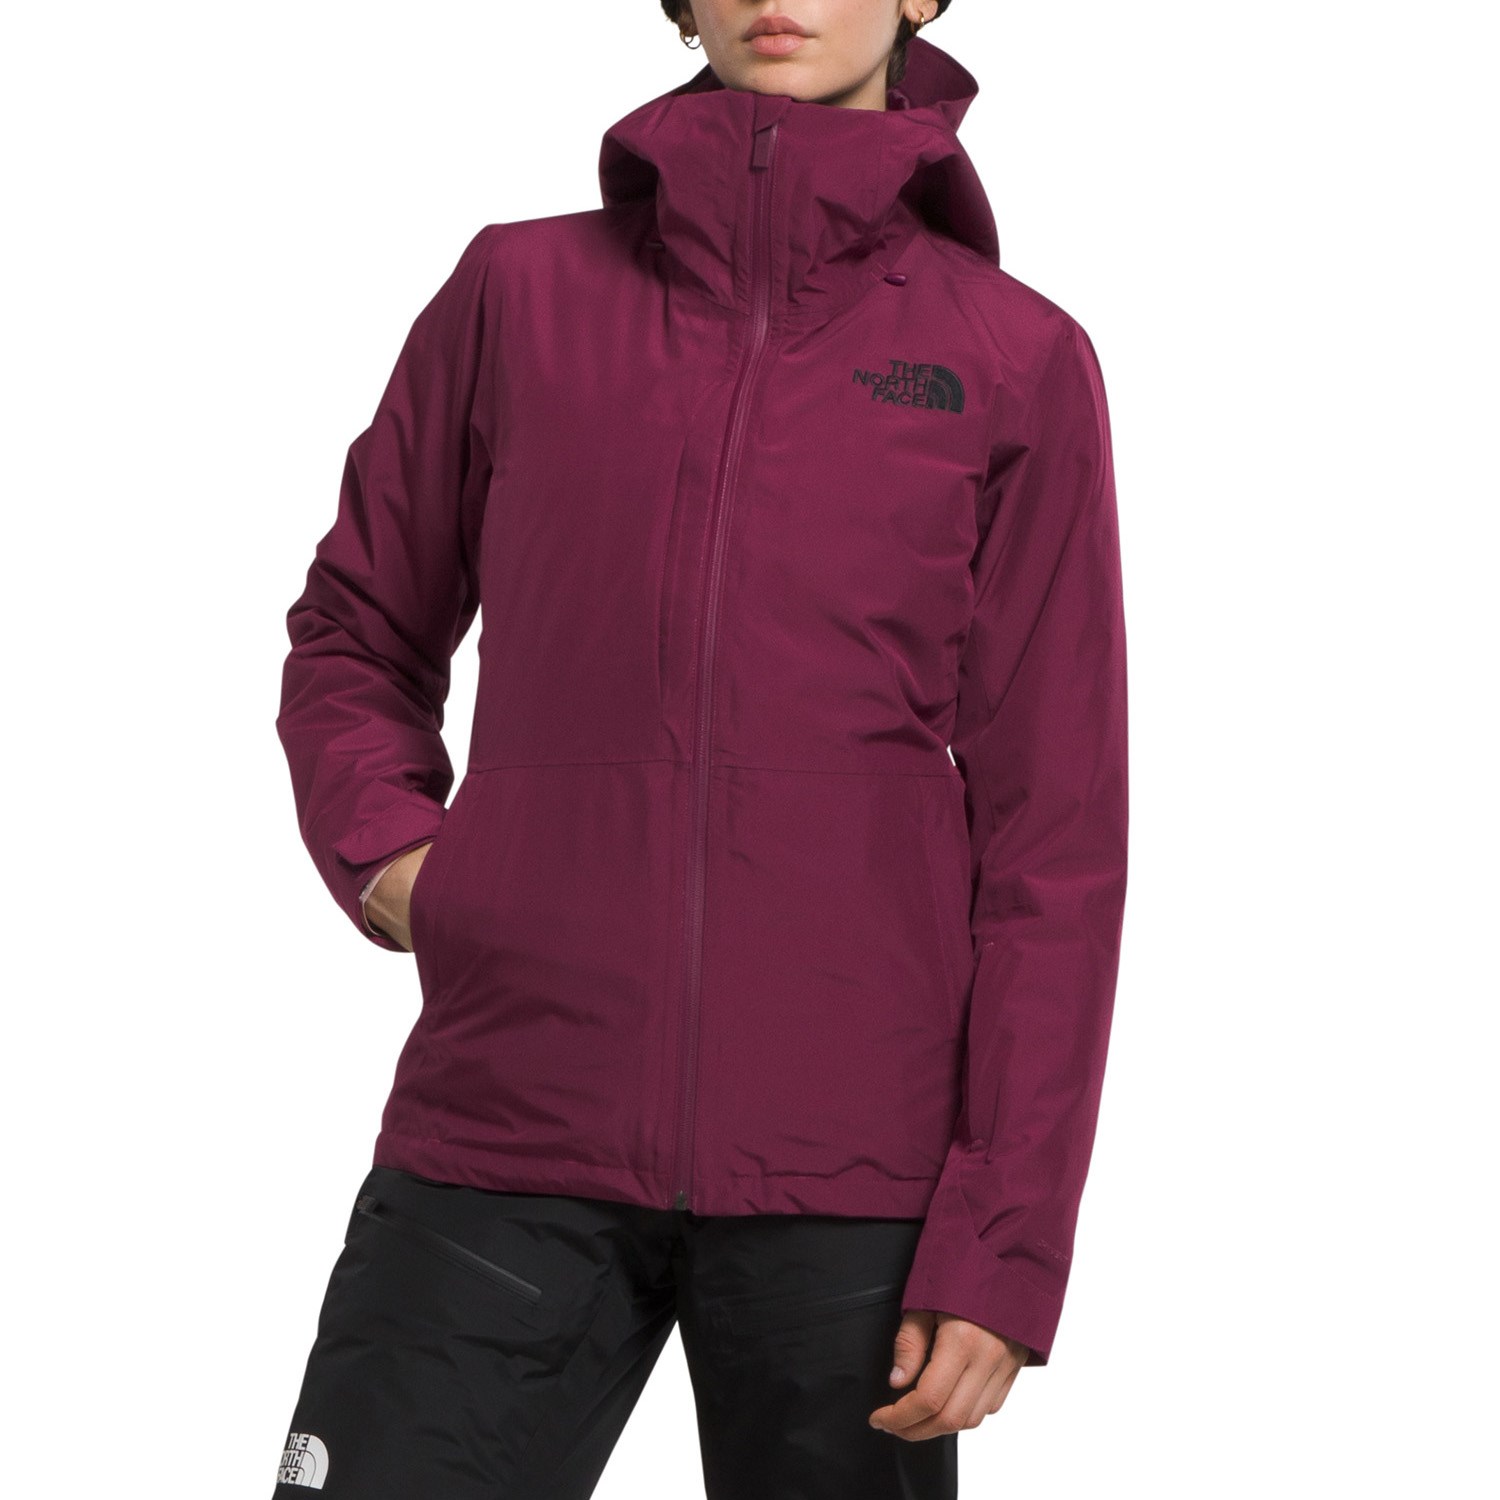 Куртка The North Face ThermoBall Eco Snow Triclimate, цвет Boysenberry куртка thermoball eco snow triclimate мужская the north face цвет cave blue